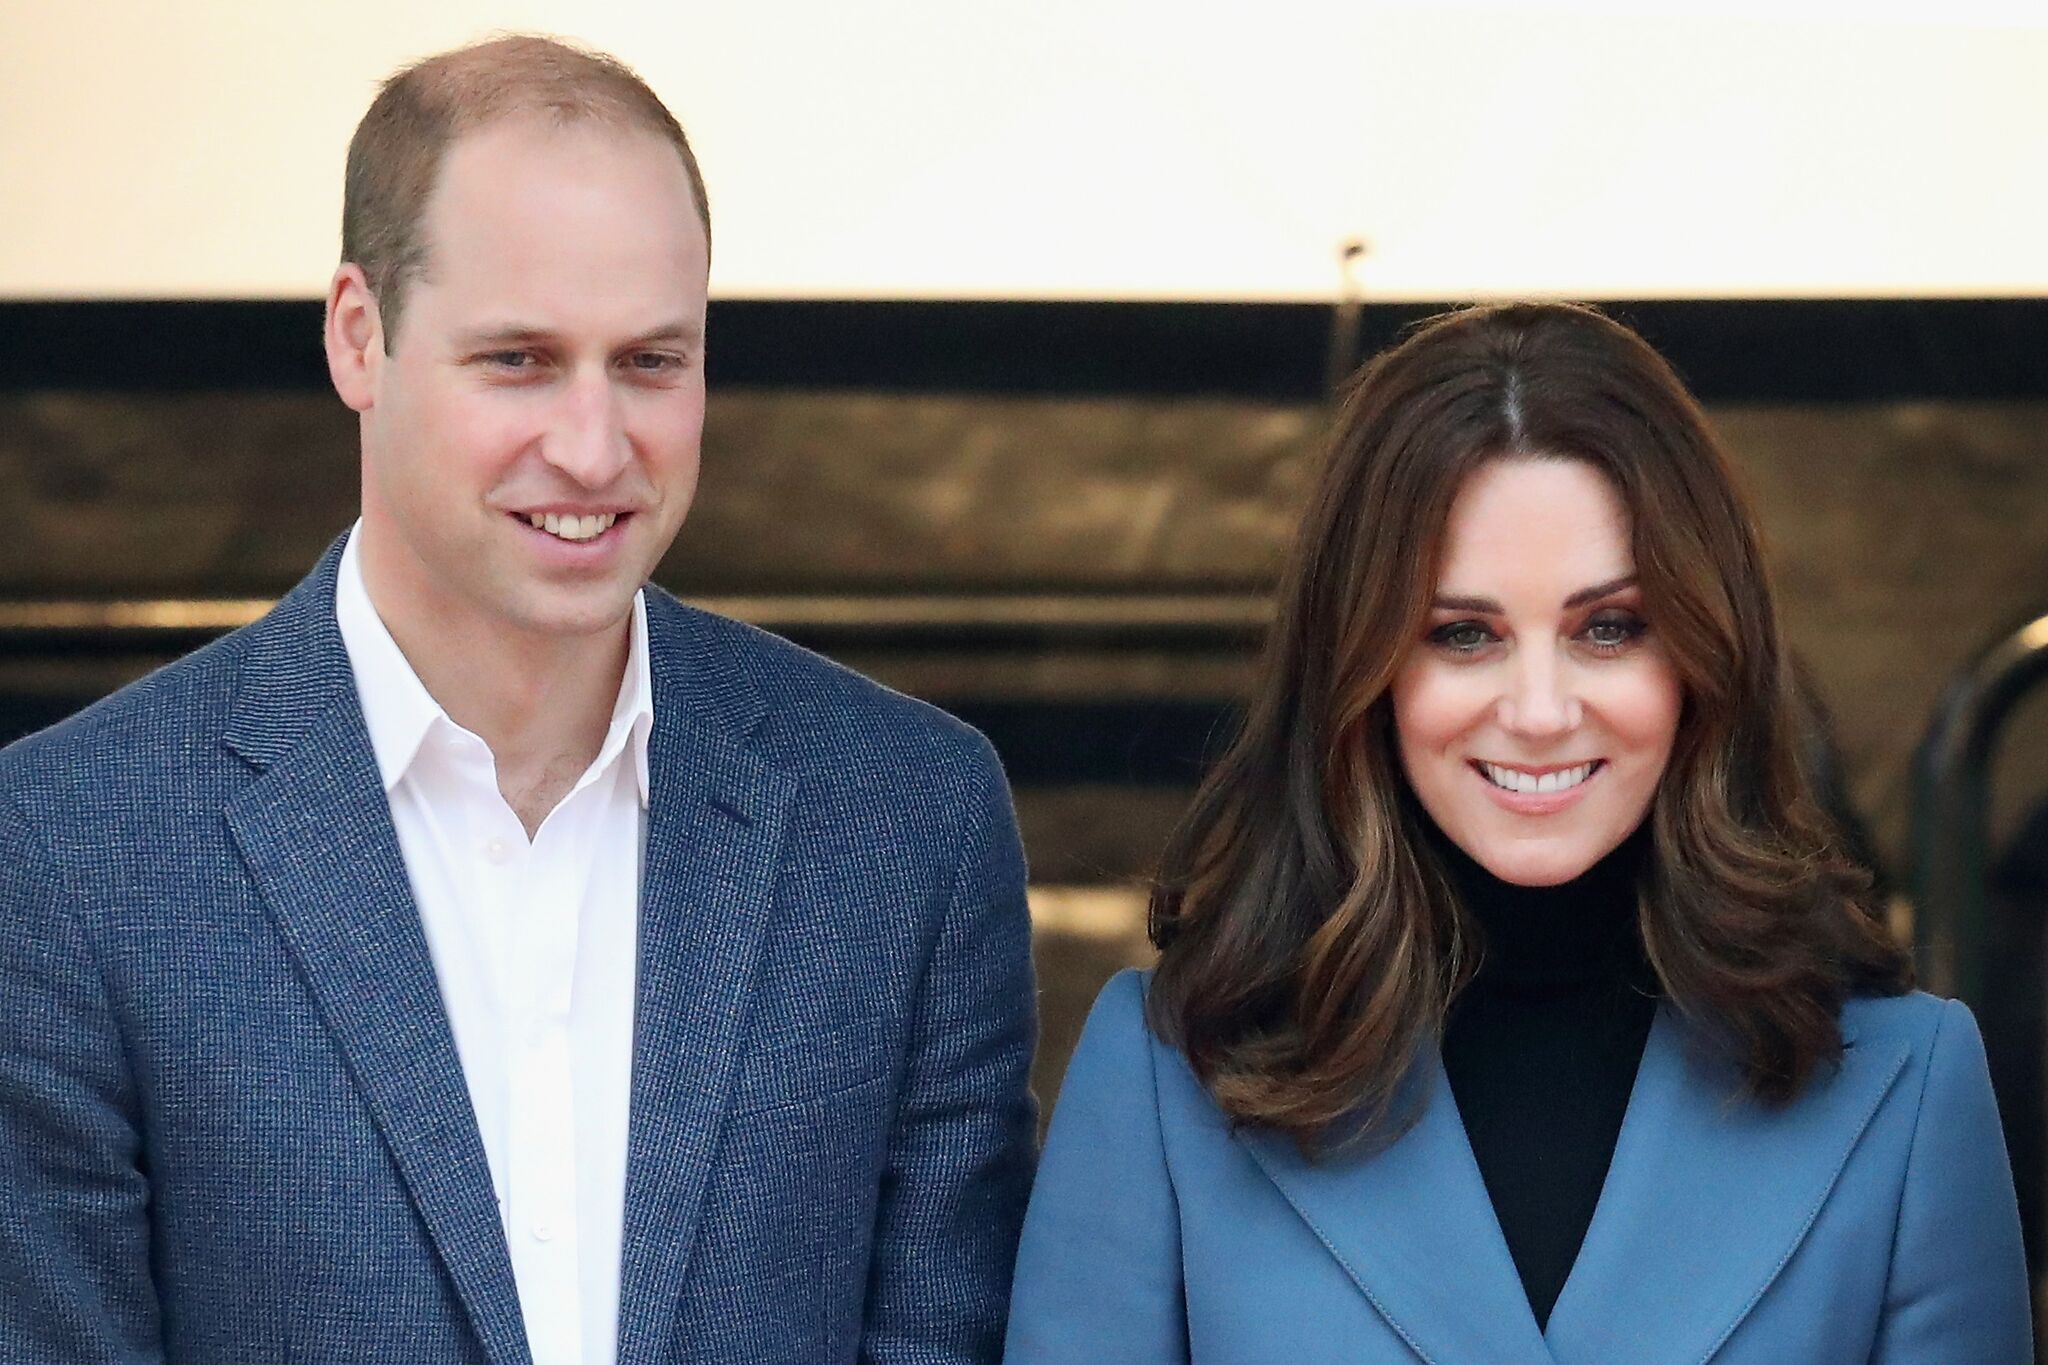 Prince William and Kate Middleton at The London Stadium on October 18, 2017 in London, England. | Photo: Getty Images